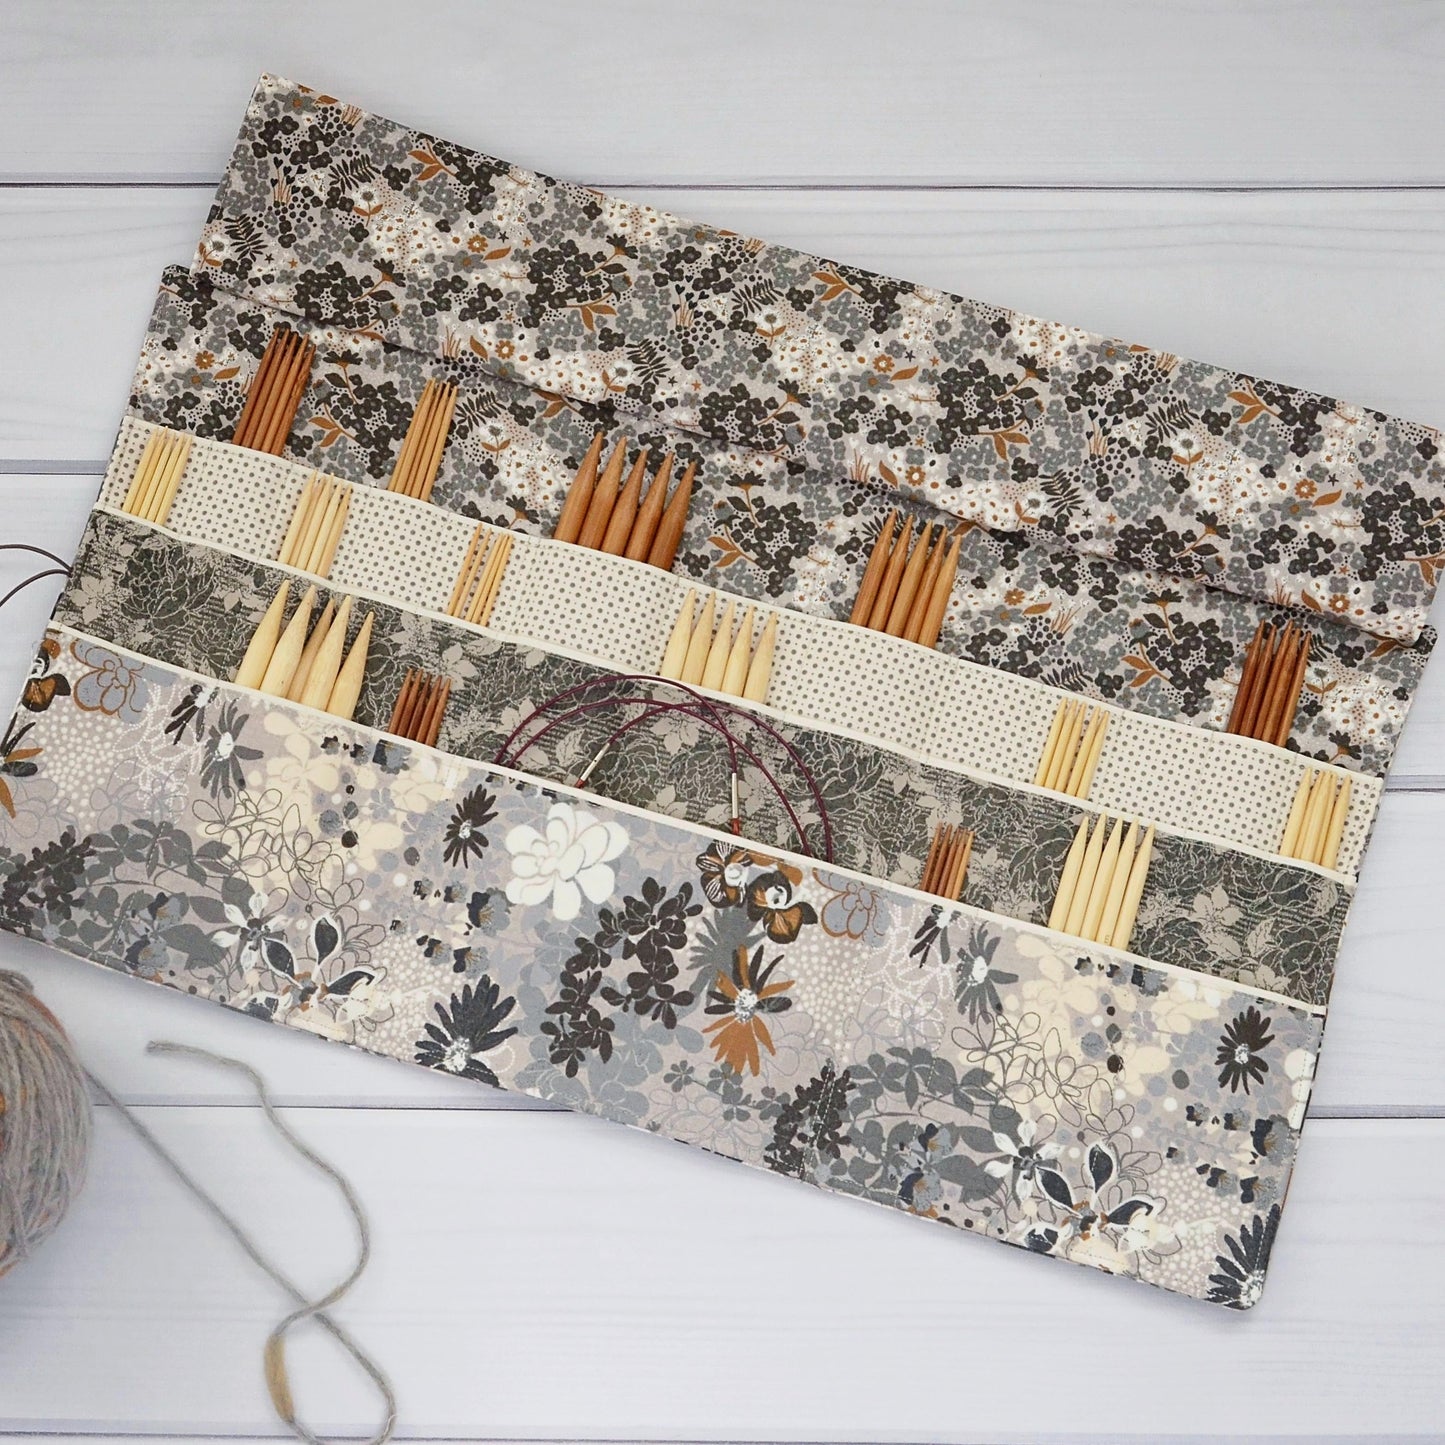 Large knitting needle tri-fold wrap in grey floral with bronze accents.  Made by Yellow Petal Handmade in Nova Scotia, Canada.